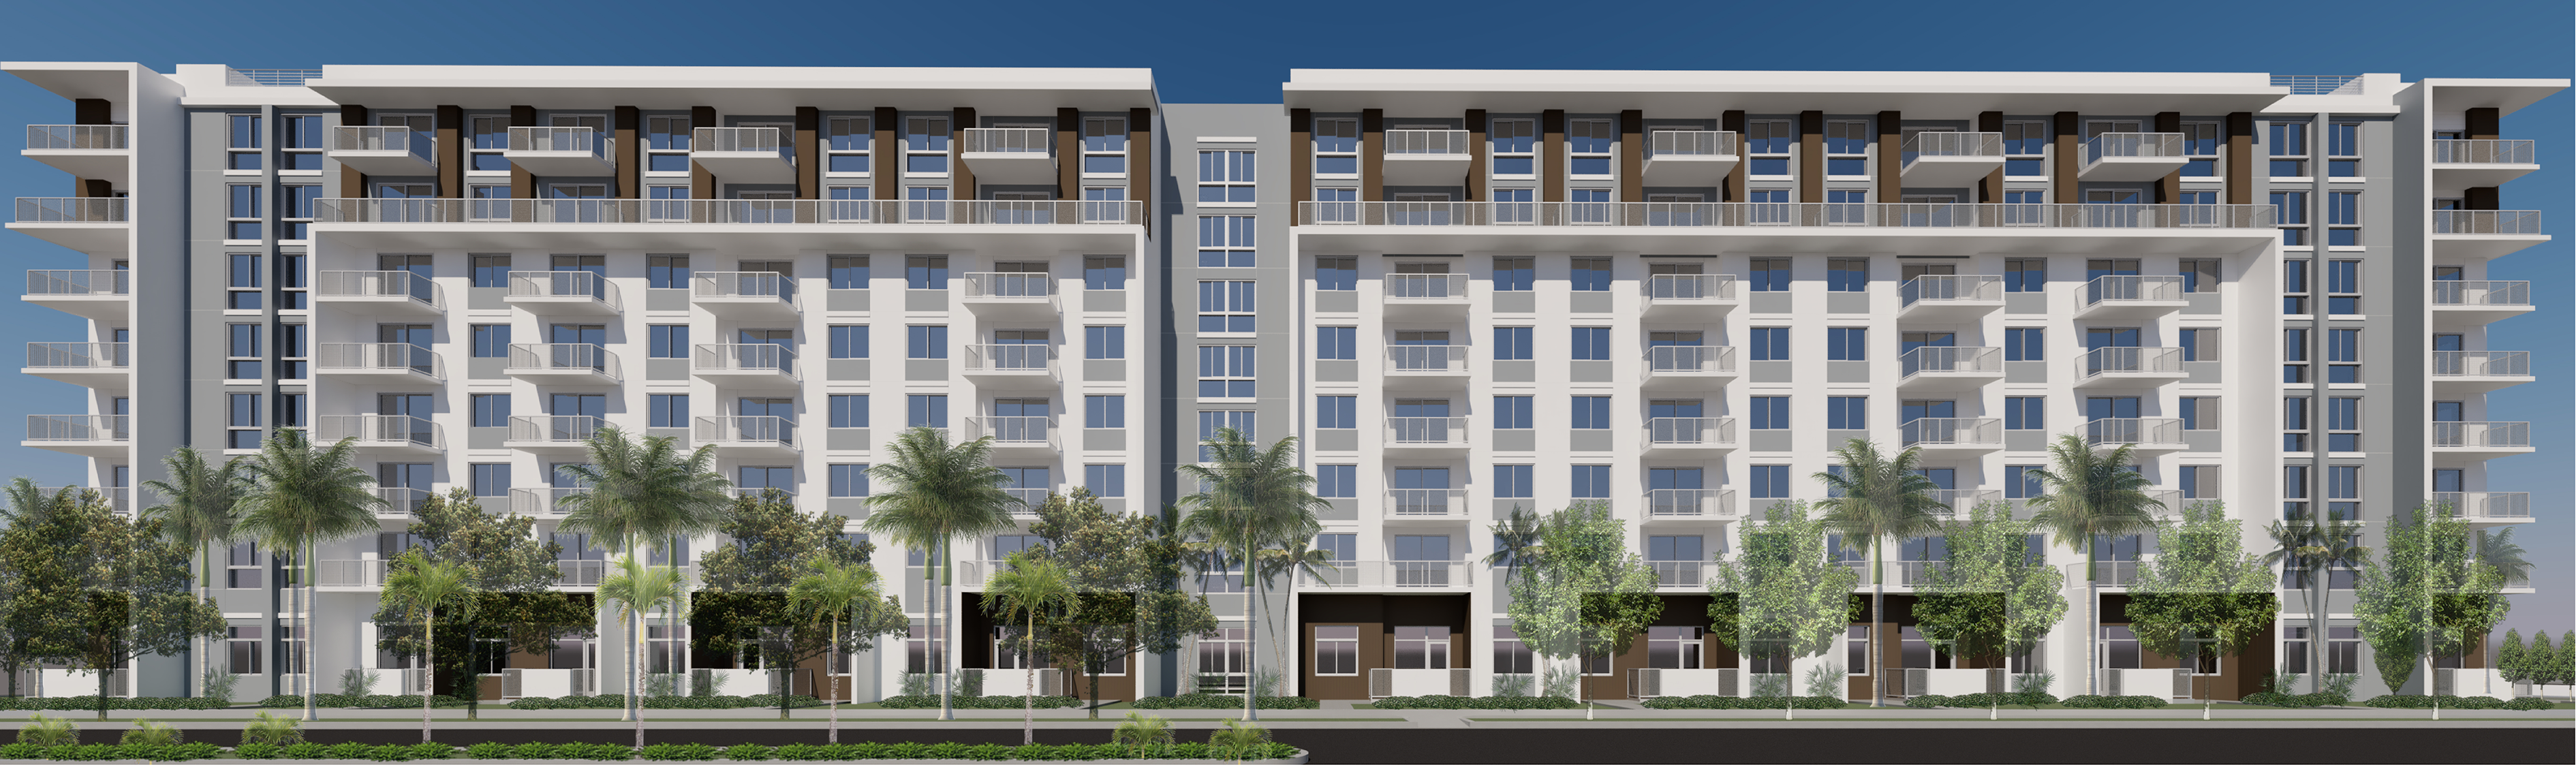 Exterior at The MARC luxury apartments in Palm Beach Gardens, FL